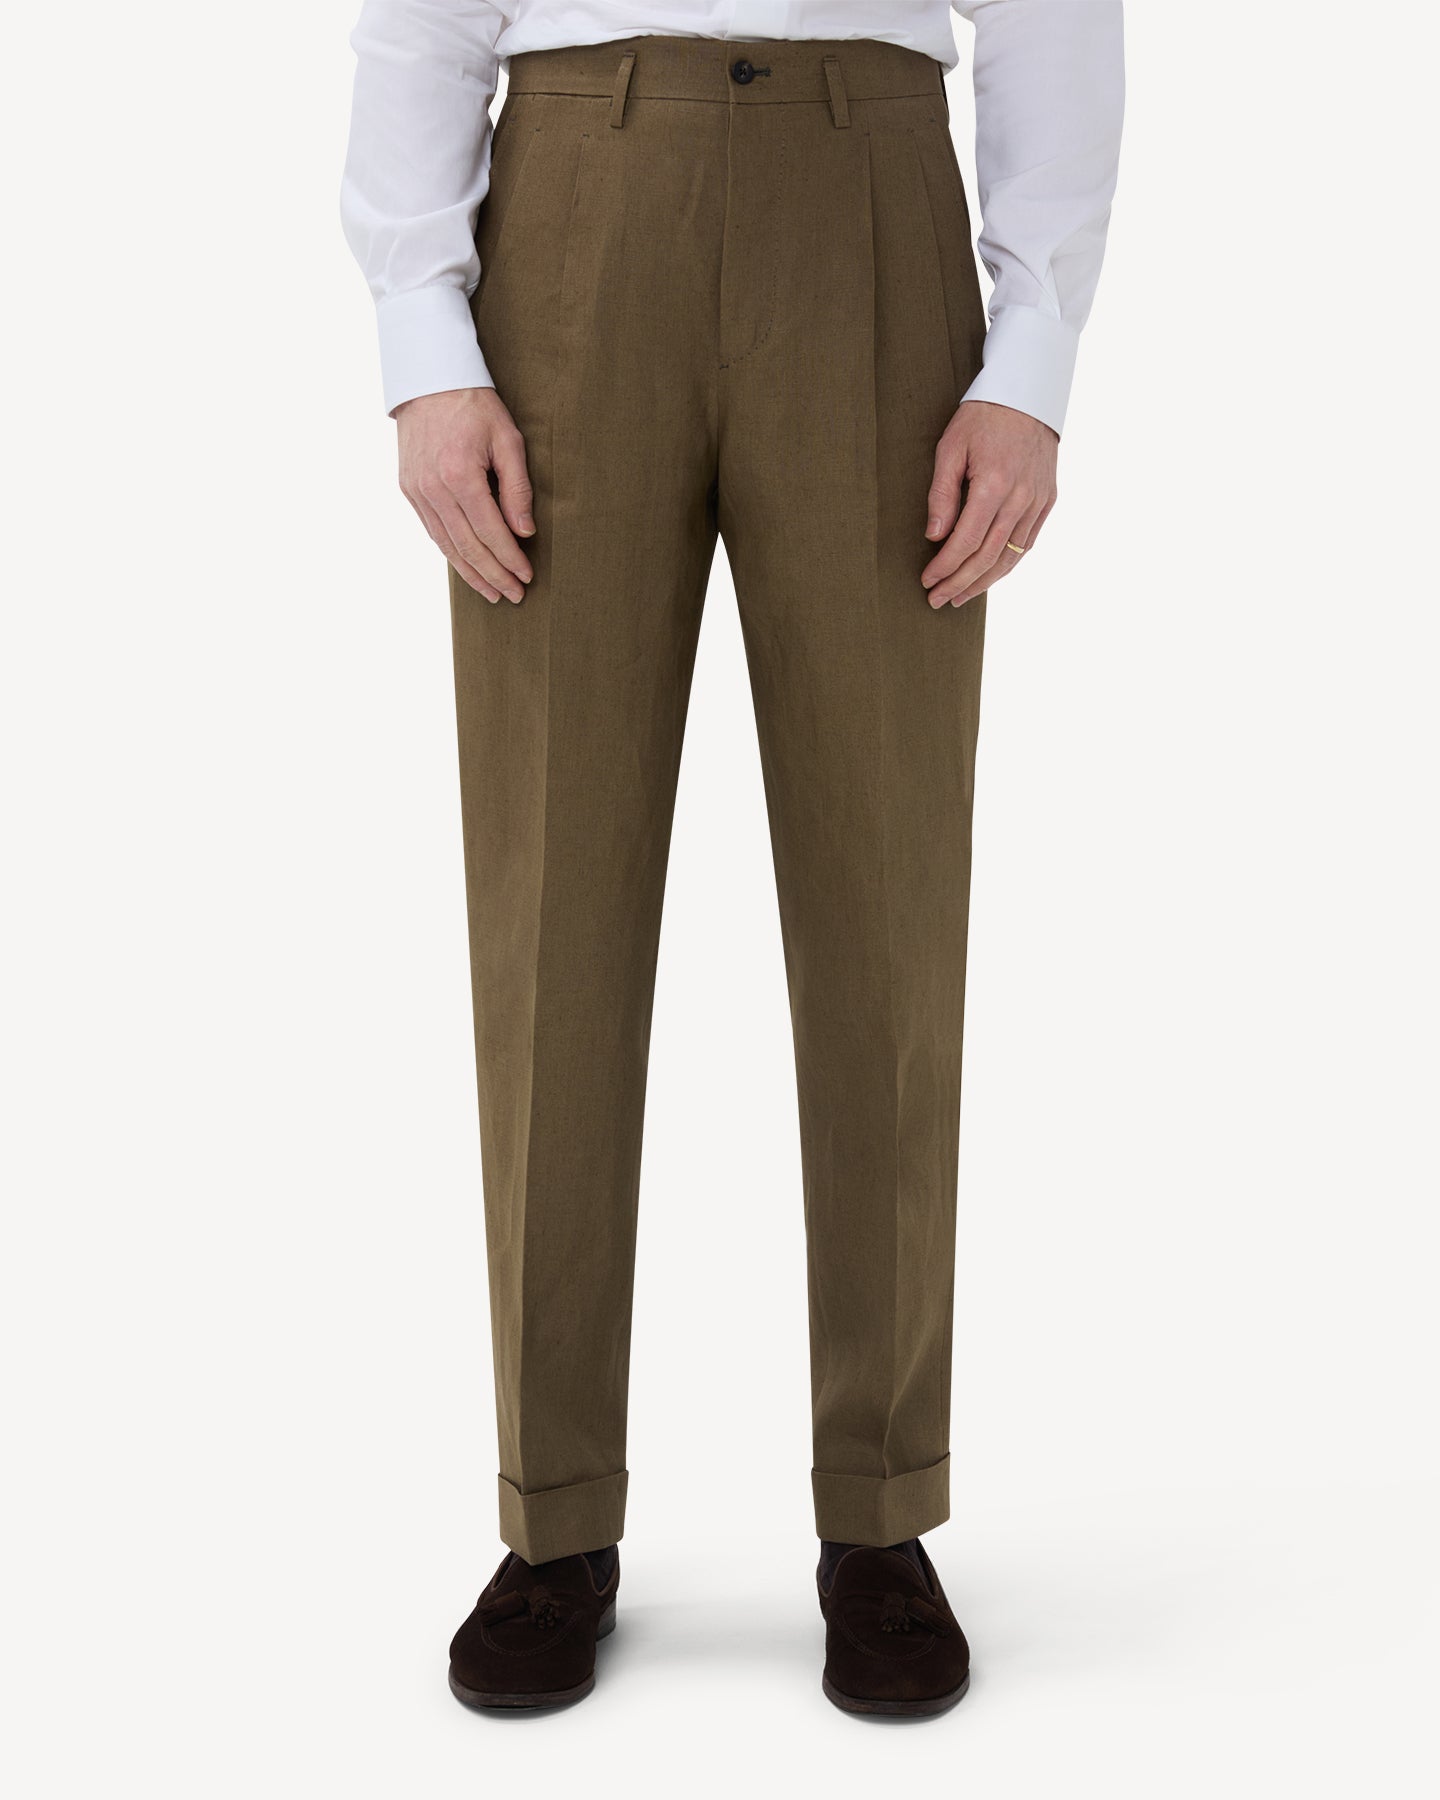 The front of olive brown linen trousers with double pleats and belt loops